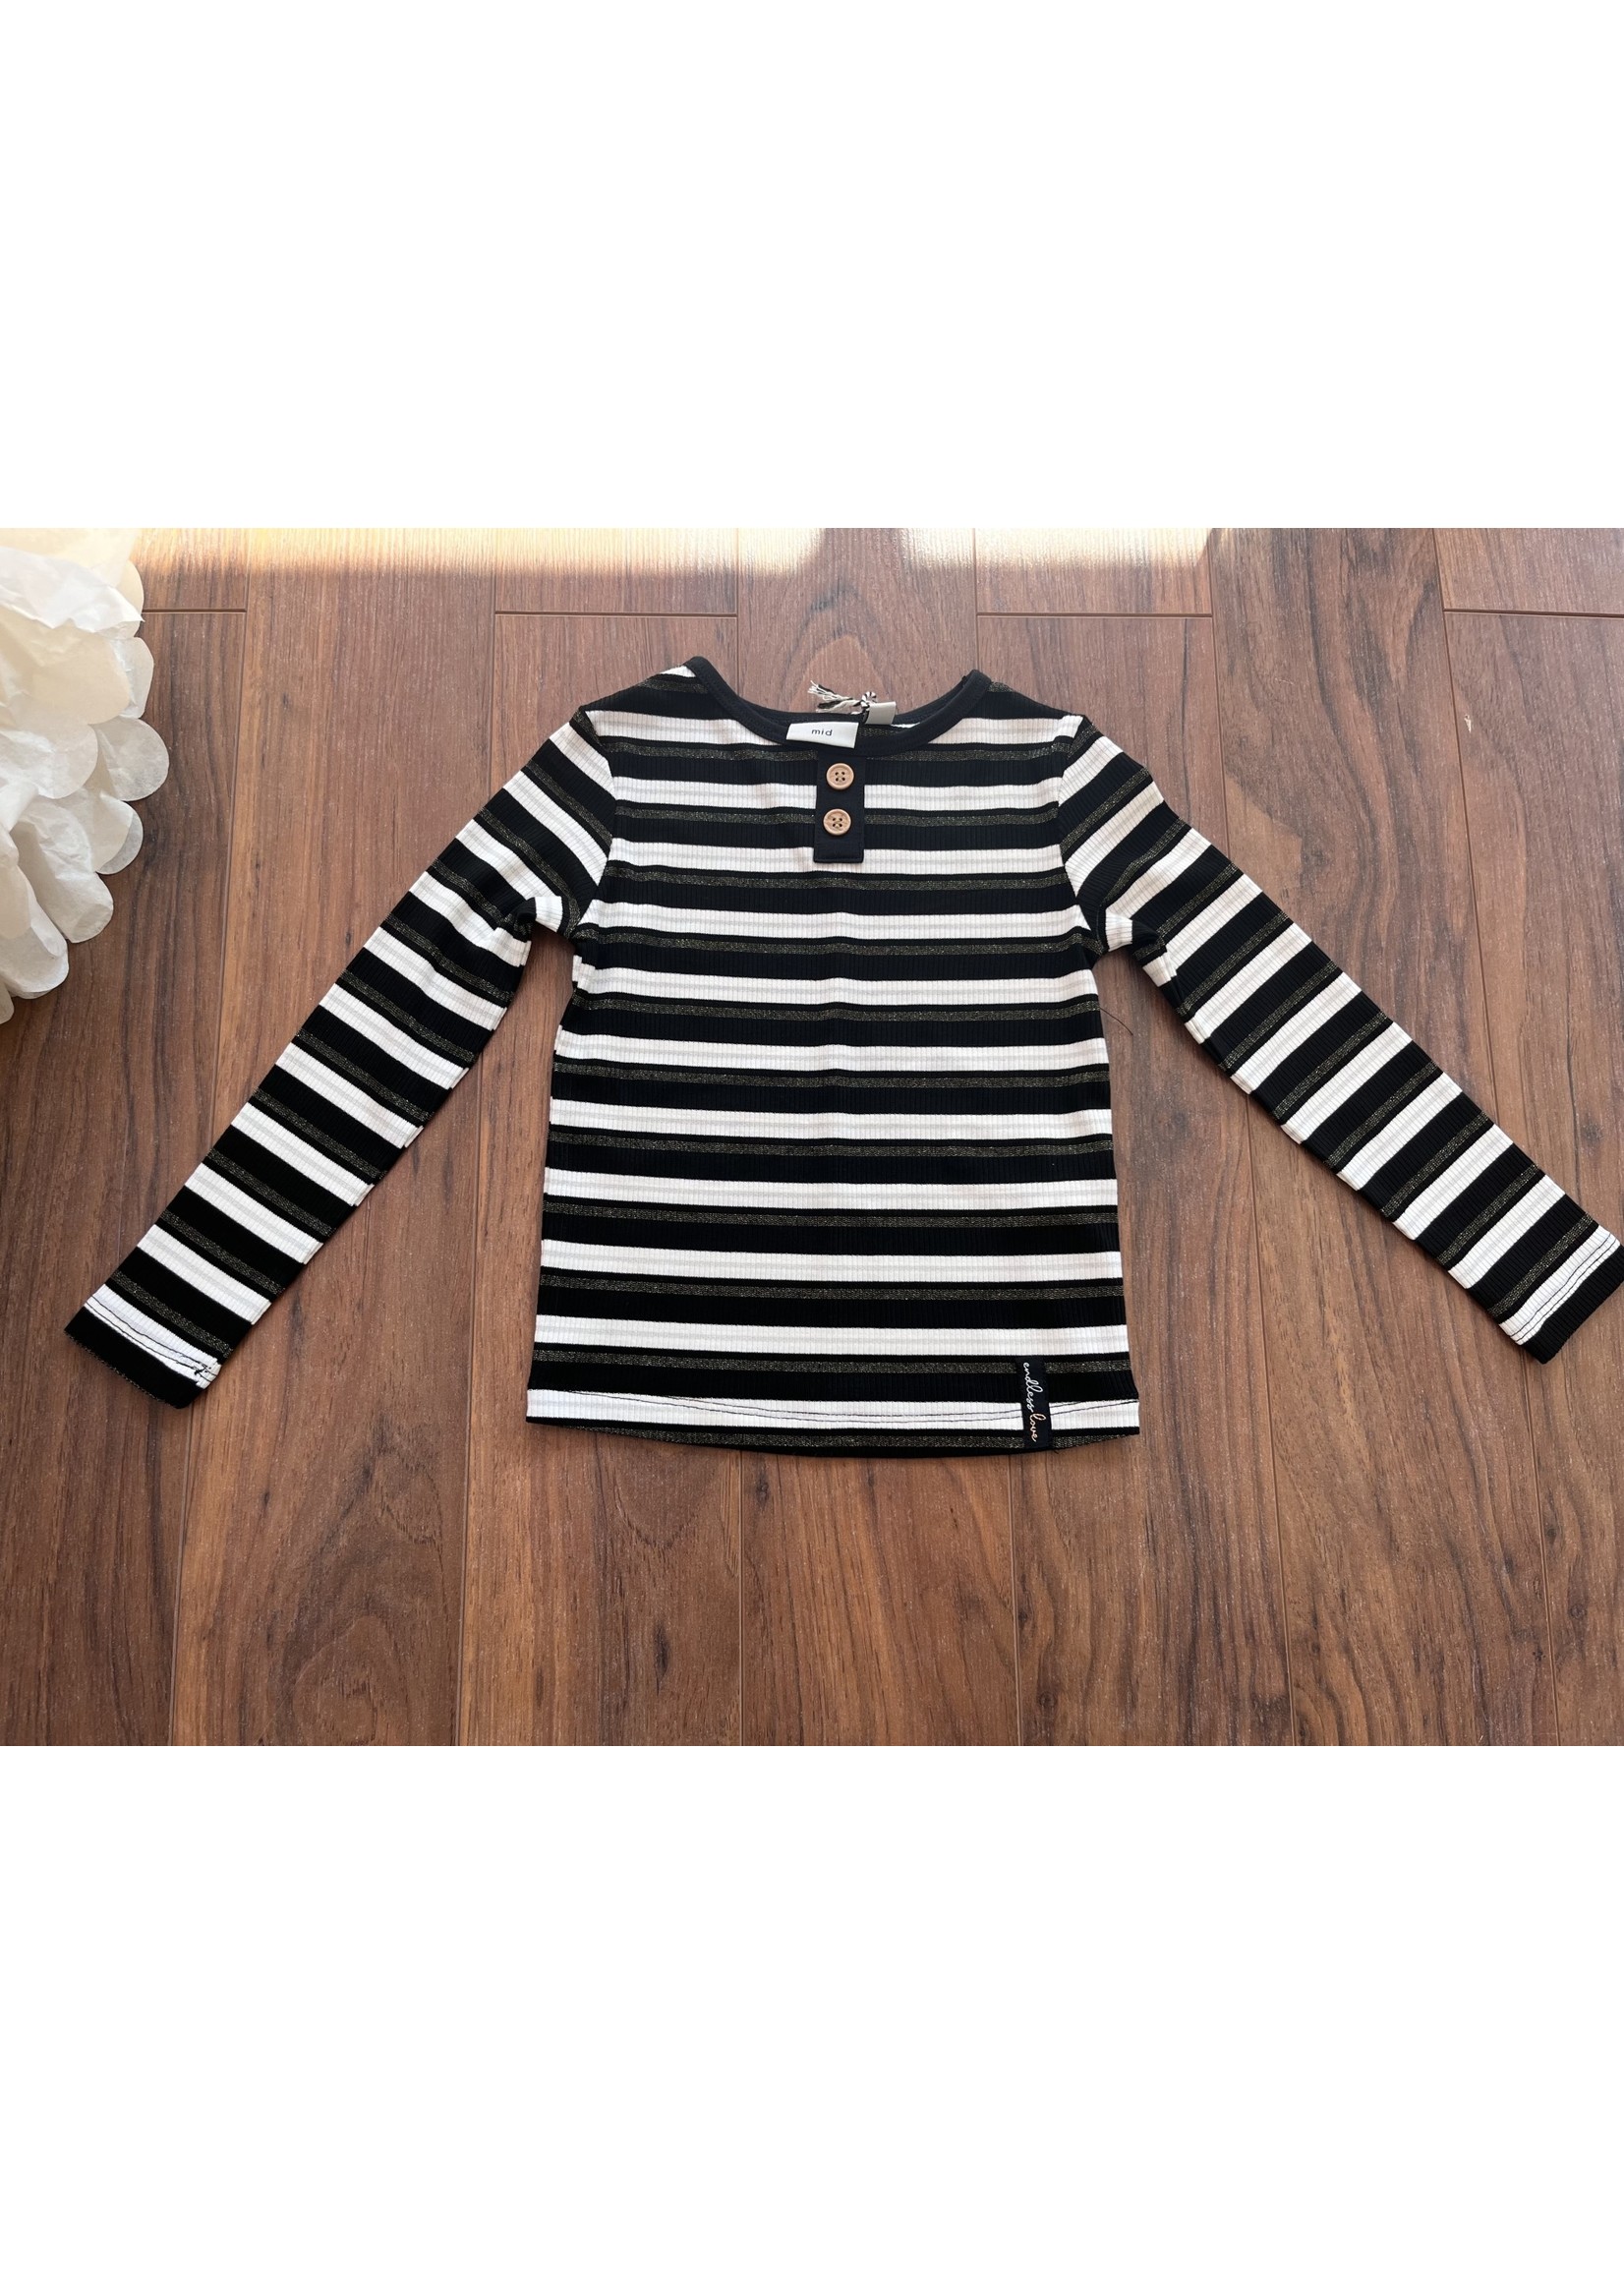 MID LONG SLEEVED STRIPED TOP